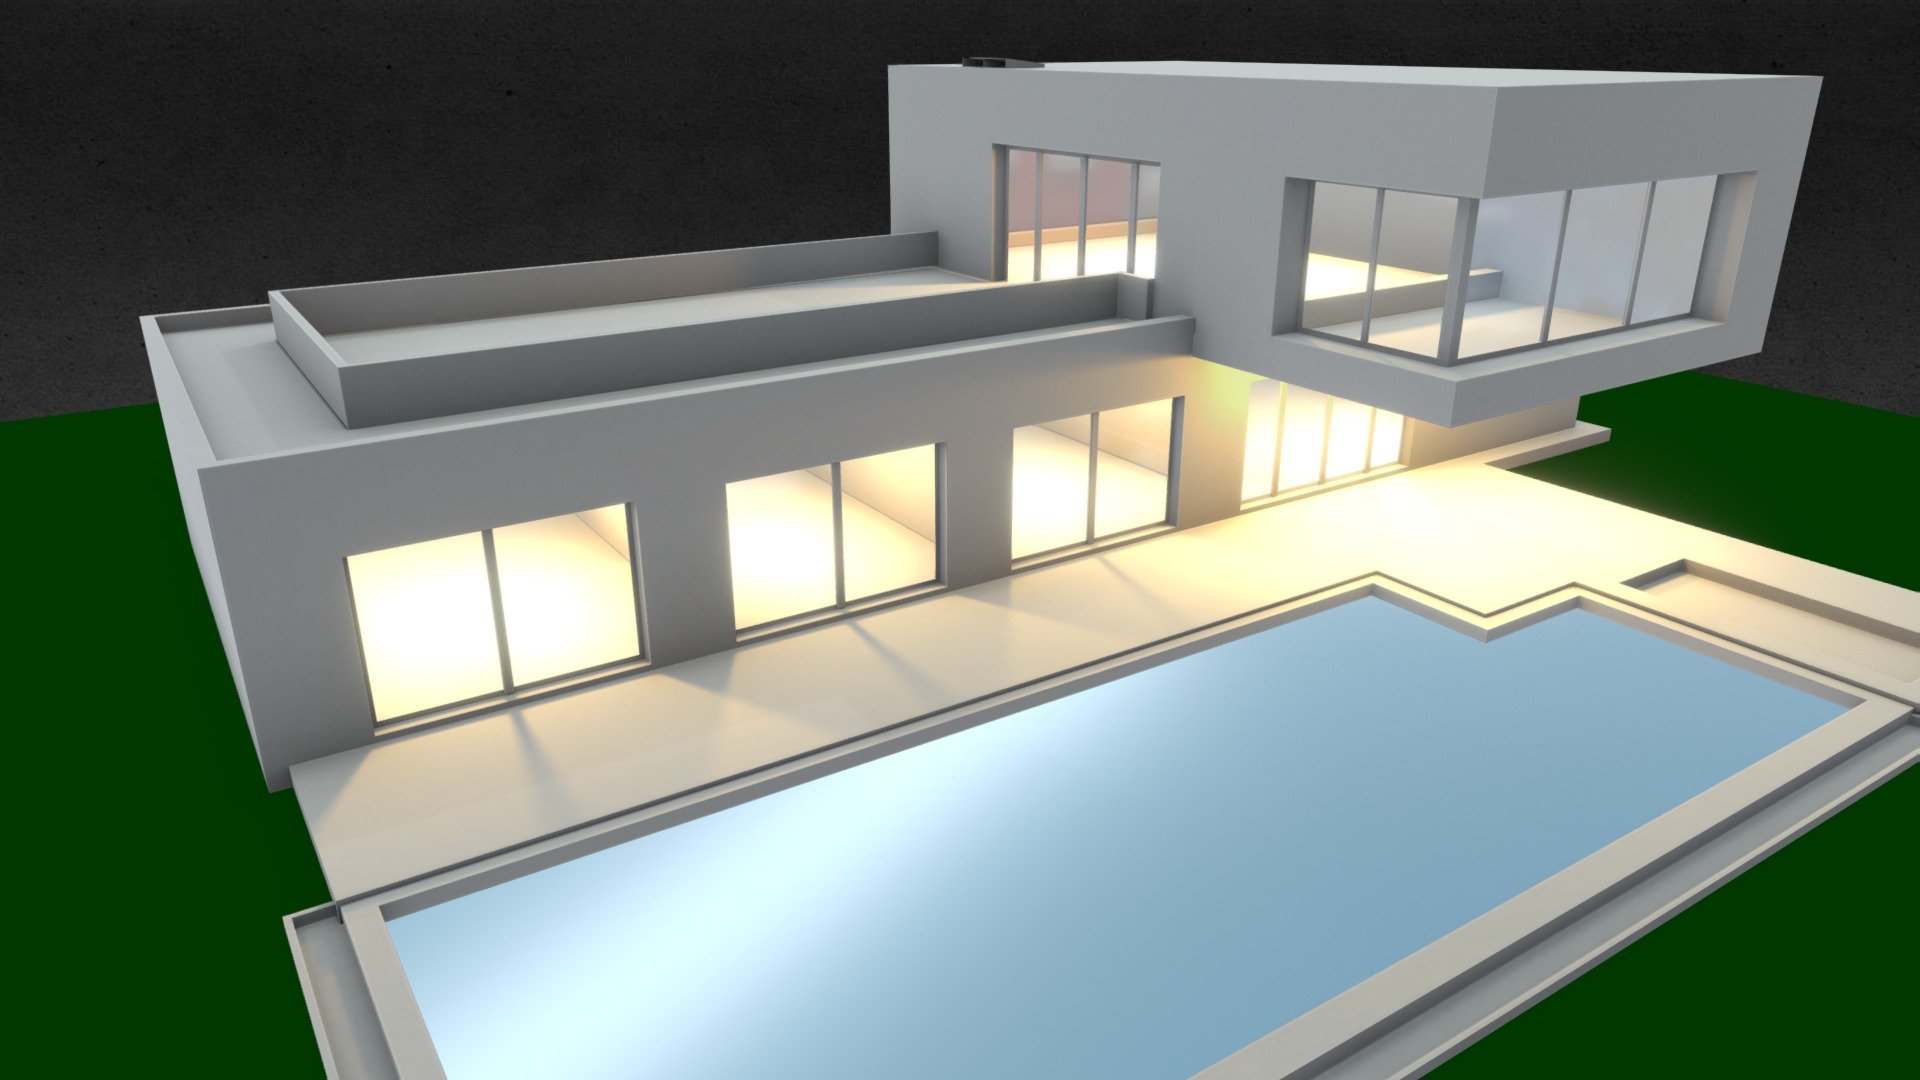 3d model of modern Building. It is ready to use, just put it into your scene.
Format FBX file size : 86KB

Click on the link to see more models : https://sketchfab.com/GbehnamG/store

If you need personalized 3d models , feel free to contact at: mr.gbehnamg@yahoo.com - Modern Villa Outside Design - Buy Royalty Free 3D model by BehNaM (@GbehnamG) 3d model